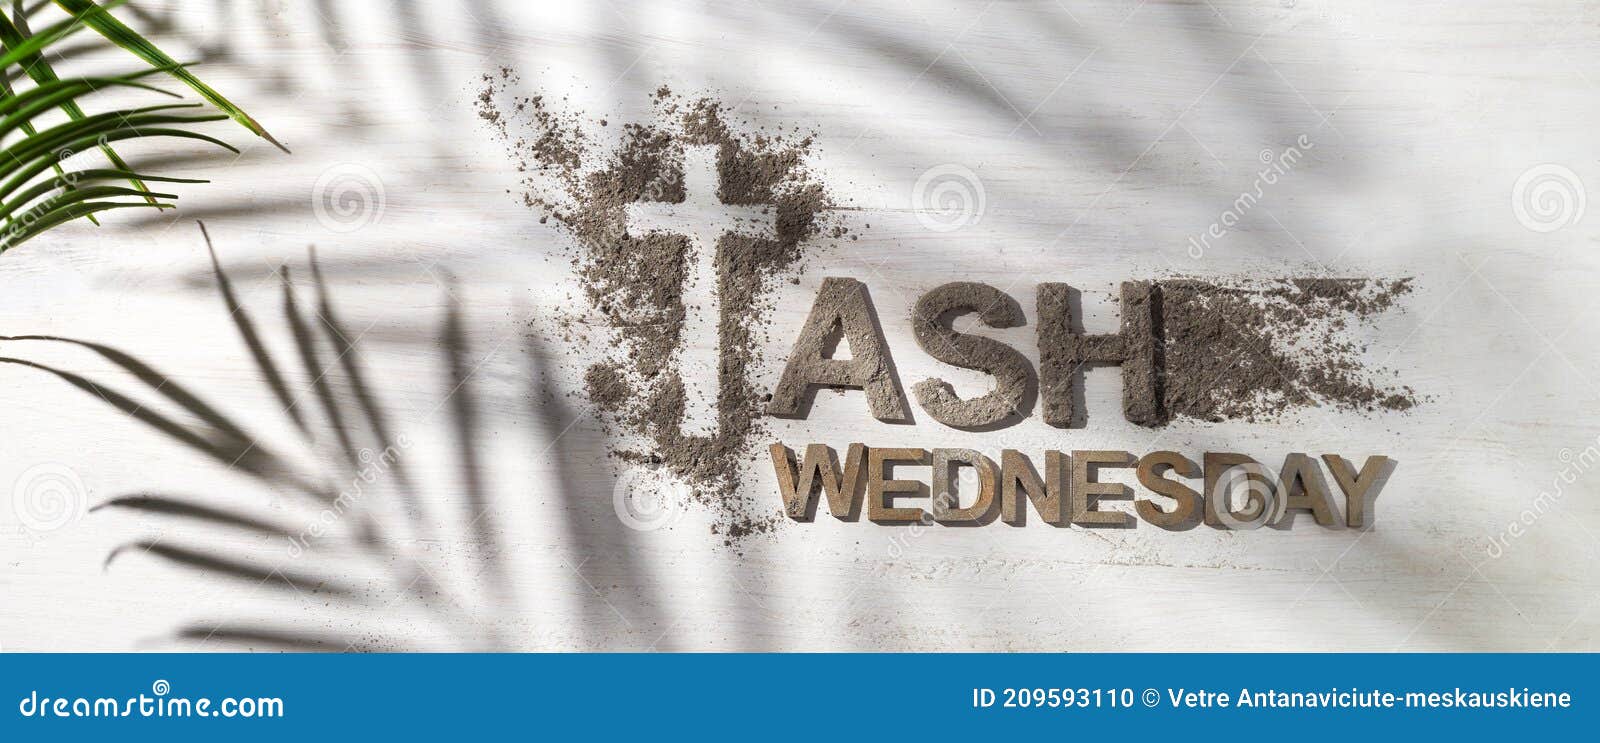 ash wednesday, crucifix made of ash, dust as christian religion. lent beginning